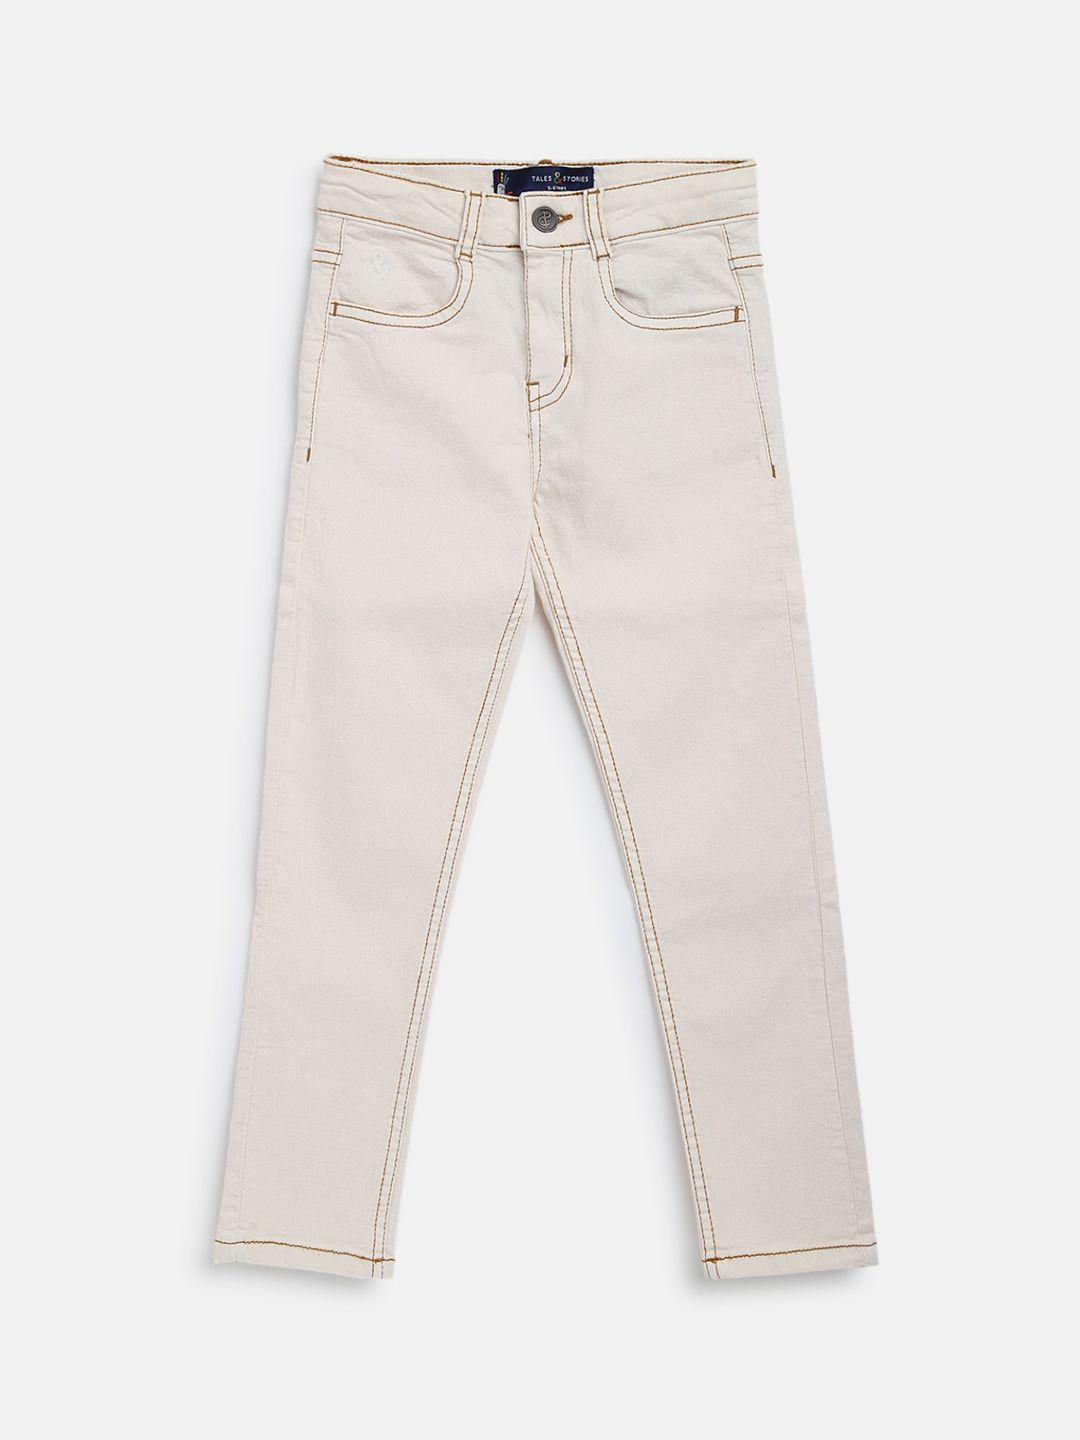 TALES & STORIES Boys Cream-Coloured Slim Fit Stretchable Jeans